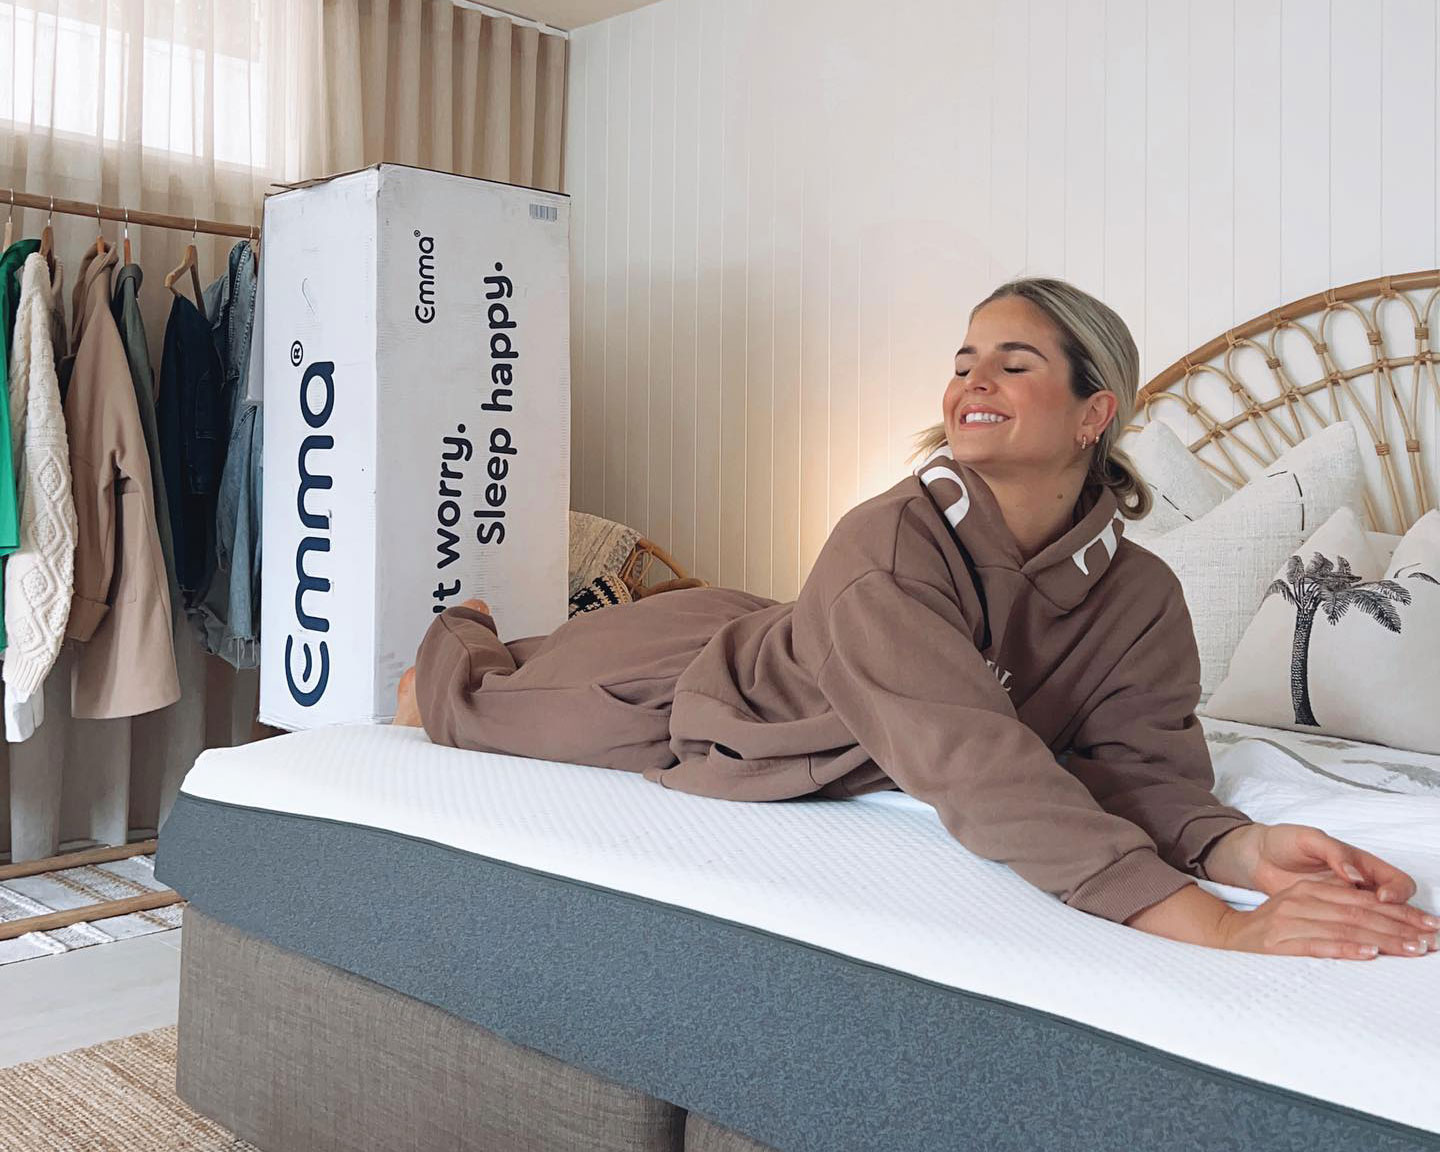 A person on an Emma mattress, which is on sale for Black Friday